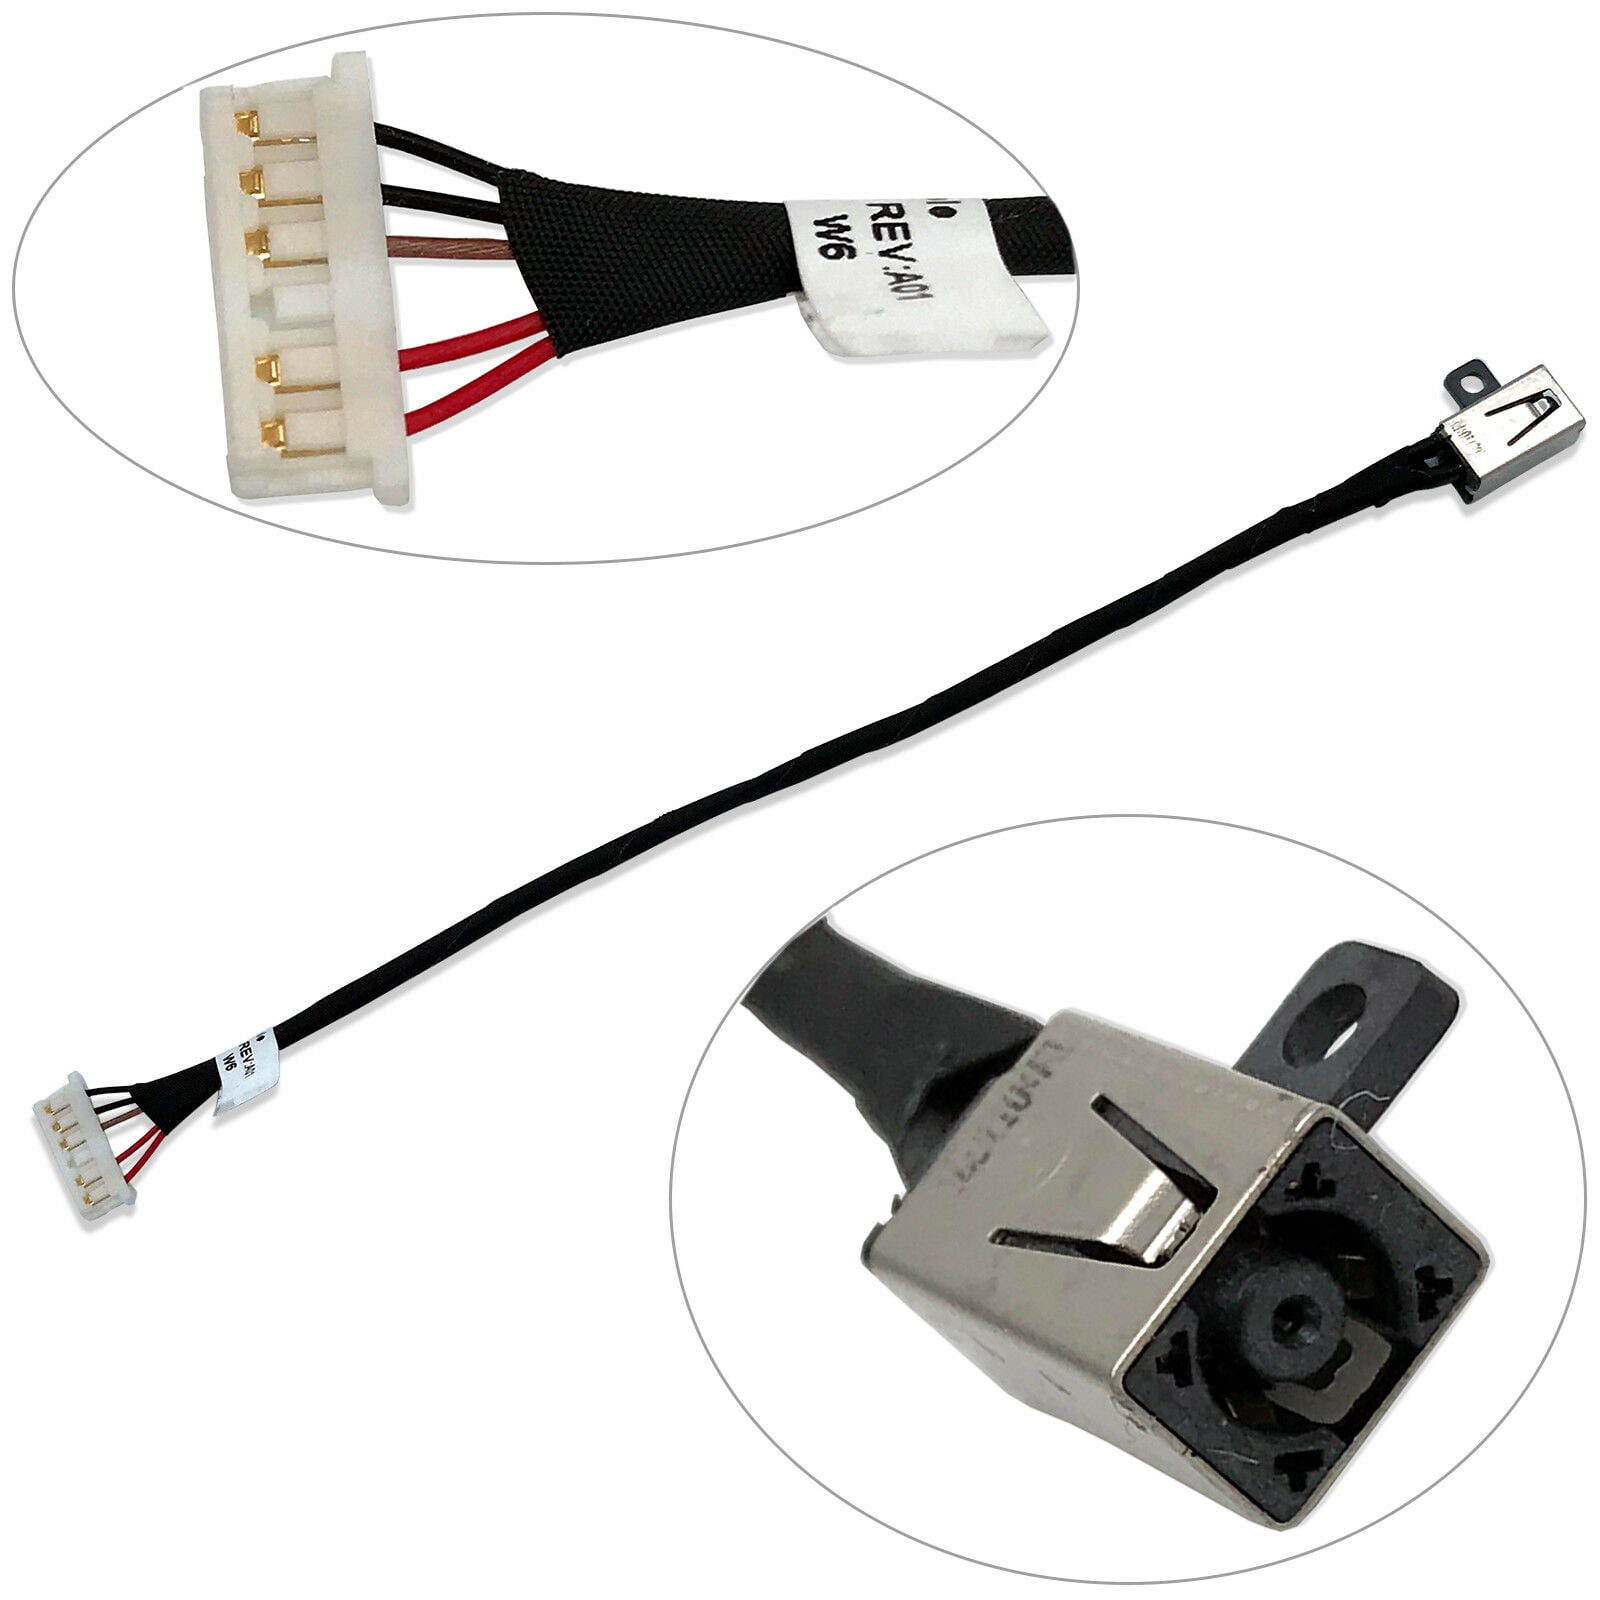 NEW DC POWER JACK HARNESS PLUG IN CABLE FOR Dell Inspiron 14-3451 14-i3451 3452 